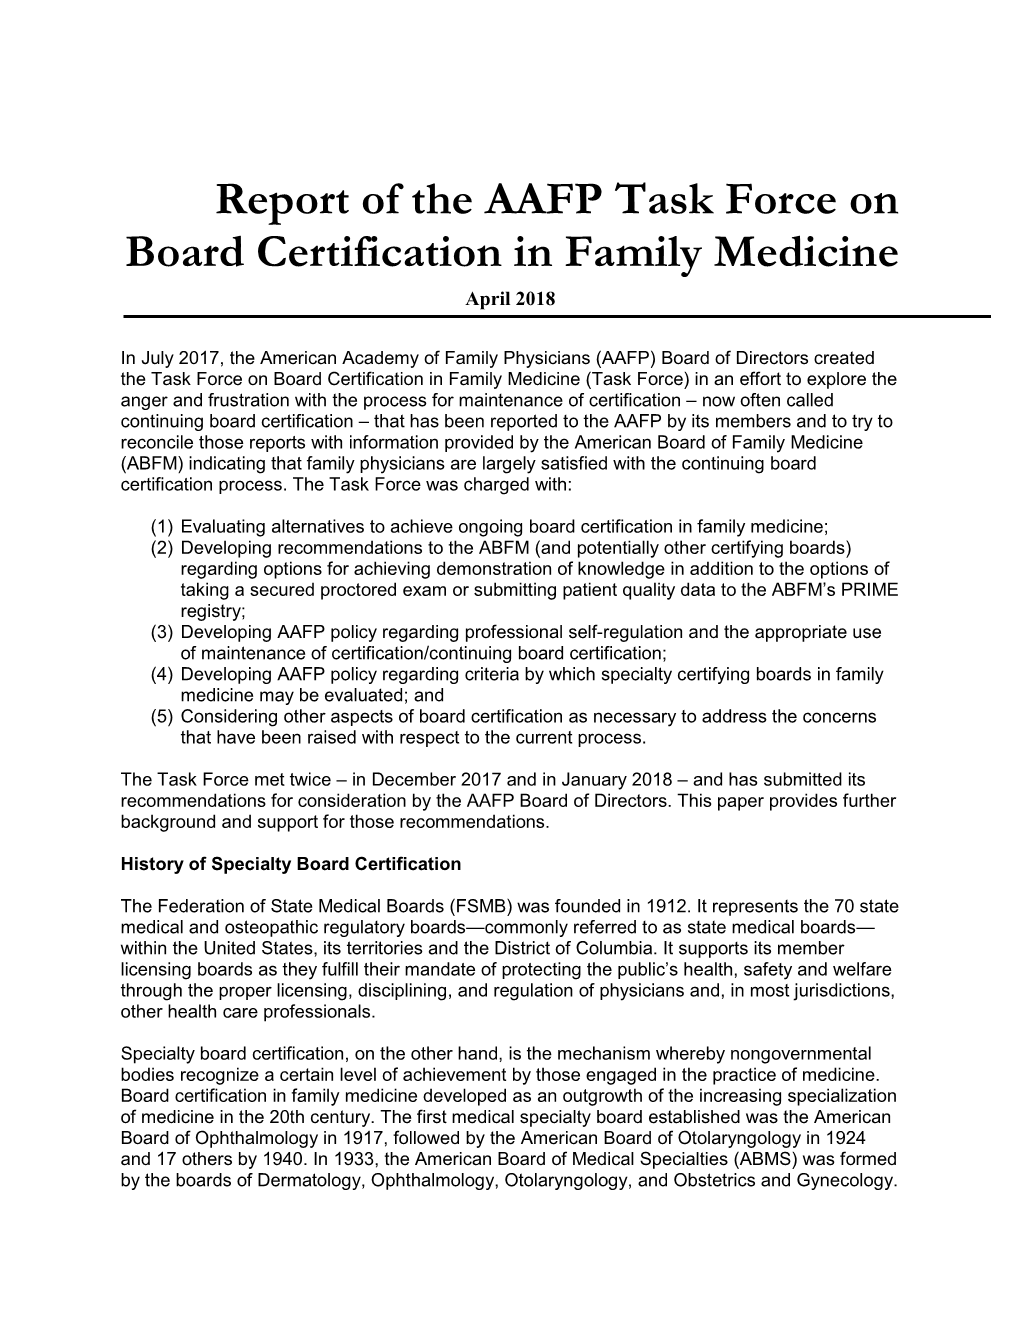 Report of the AAFP Task Force on Board Certification in Family Medicine